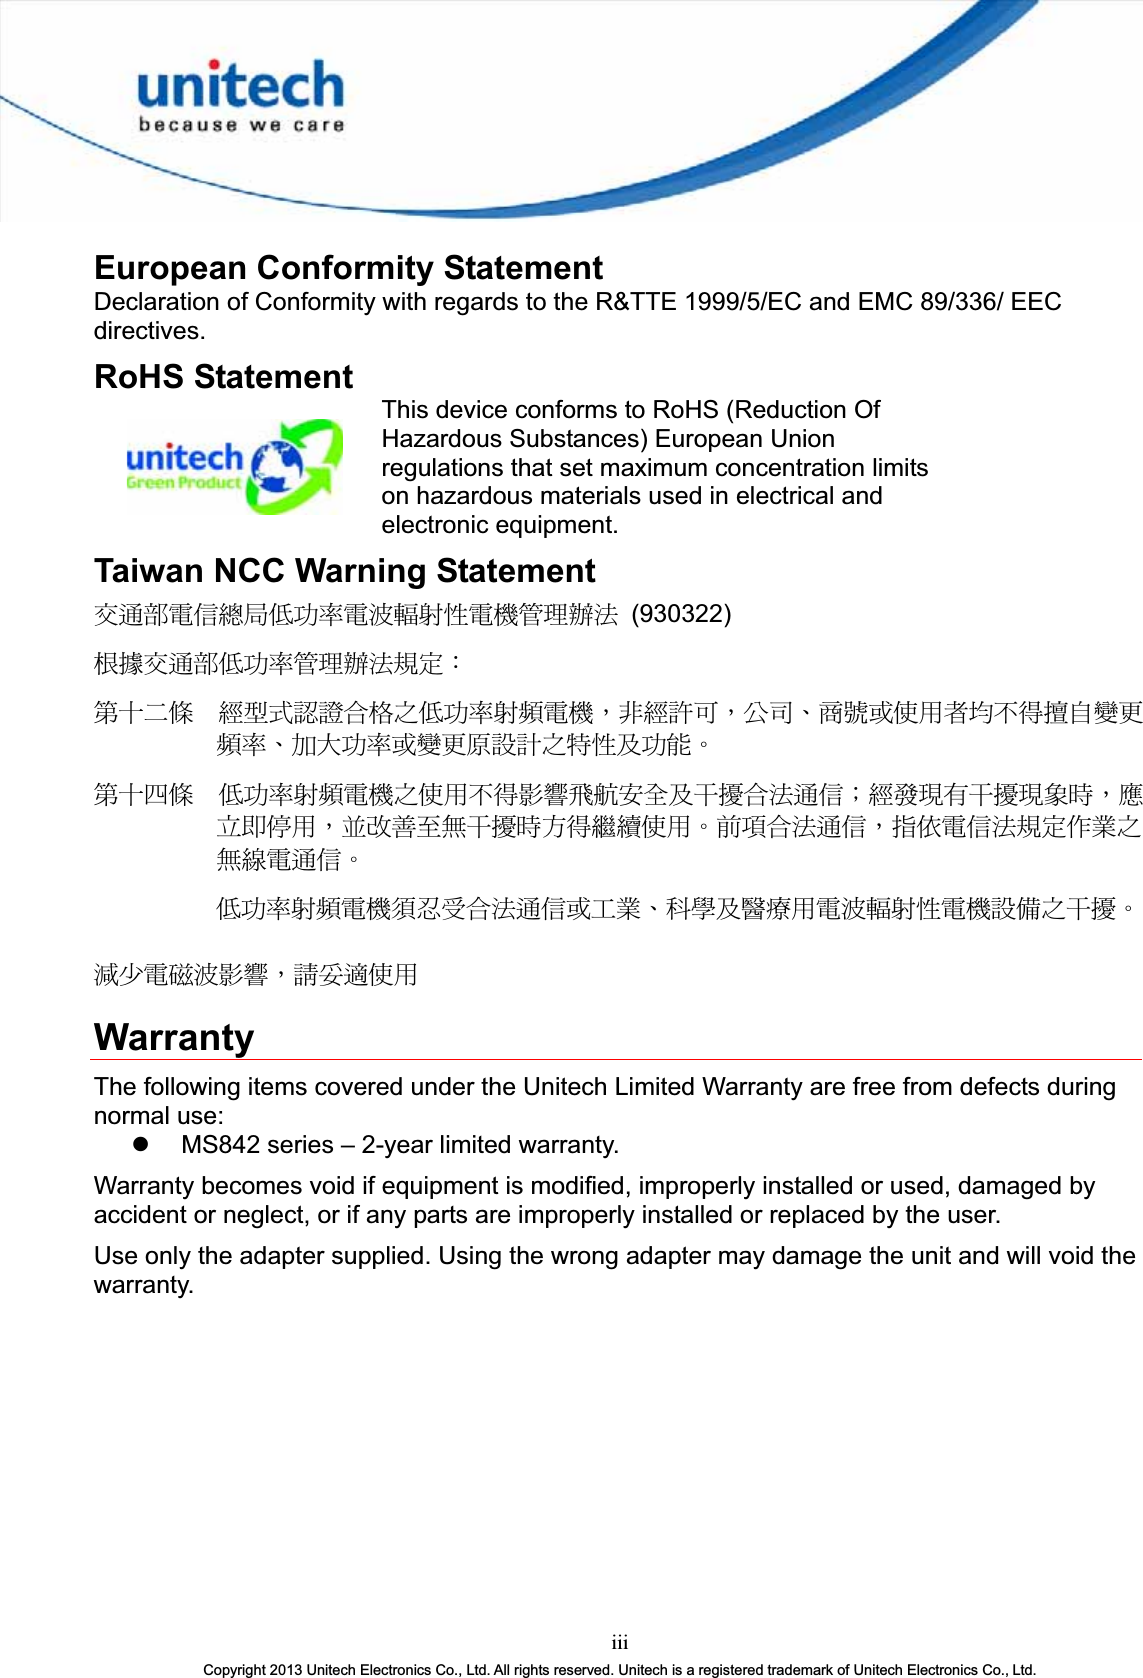 European Conformity Statement Declaration of Conformity with regards to the R&amp;TTE 1999/5/EC and EMC 89/336/ EEC directives.RoHS Statement This device conforms to RoHS (Reduction Of Hazardous Substances) European Union regulations that set maximum concentration limits on hazardous materials used in electrical and electronic equipment. Taiwan NCC Warning Statement ٌຏຝሽॾ᜔ݝ܅פ෷ሽंᘿ୴ࢤሽᖲጥ෻ᙄऄ (930322) ௅ᖕٌຏຝ܅פ෷ጥ෻ᙄऄ๵ࡳΚรԼԲයʳ ᆖীڤᎁᢞٽ௑հ܅פ෷୴᙮ሽᖲΔॺᆖ๺ױΔֆ׹Ε೸ᇆࢨࠌشृ݁լ൓ᖐ۞᧢ޓ᙮෷ΕףՕפ෷ࢨ᧢ޓ଺๻ૠհ௽ࢤ֗פ౨ΖรԼ؄යʳ ܅פ෷୴᙮ሽᖲհࠌشլ൓ᐙ᥼ଆ౰ڜ٤֗եឫٽऄຏॾΙᆖ࿇෼ڶեឫ෼ွழΔᚨمܛೖشΔࠀޏ࿳۟ྤեឫழֱ൓ᤉᥛࠌشΖছႈٽऄຏॾΔਐࠉሽॾऄ๵ࡳ܂ᄐհྤᒵሽຏॾΖ܅פ෷୴᙮ሽᖲႊݴ࠹ٽऄຏॾࢨՠᄐΕઝᖂ֗᠔᛭شሽंᘿ୴ࢤሽᖲ๻ໂհեឫΖ྇֟ሽ጖ंᐙ᥼ΔᓮݔᔞࠌشWarranty The following items covered under the Unitech Limited Warranty are free from defects during normal use: z MS842 series – 2-year limited warranty. Warranty becomes void if equipment is modified, improperly installed or used, damaged by accident or neglect, or if any parts are improperly installed or replaced by the user. Use only the adapter supplied. Using the wrong adapter may damage the unit and will void the warranty. iiiCopyright 2013 Unitech Electronics Co., Ltd. All rights reserved. Unitech is a registered trademark of Unitech Electronics Co., Ltd.